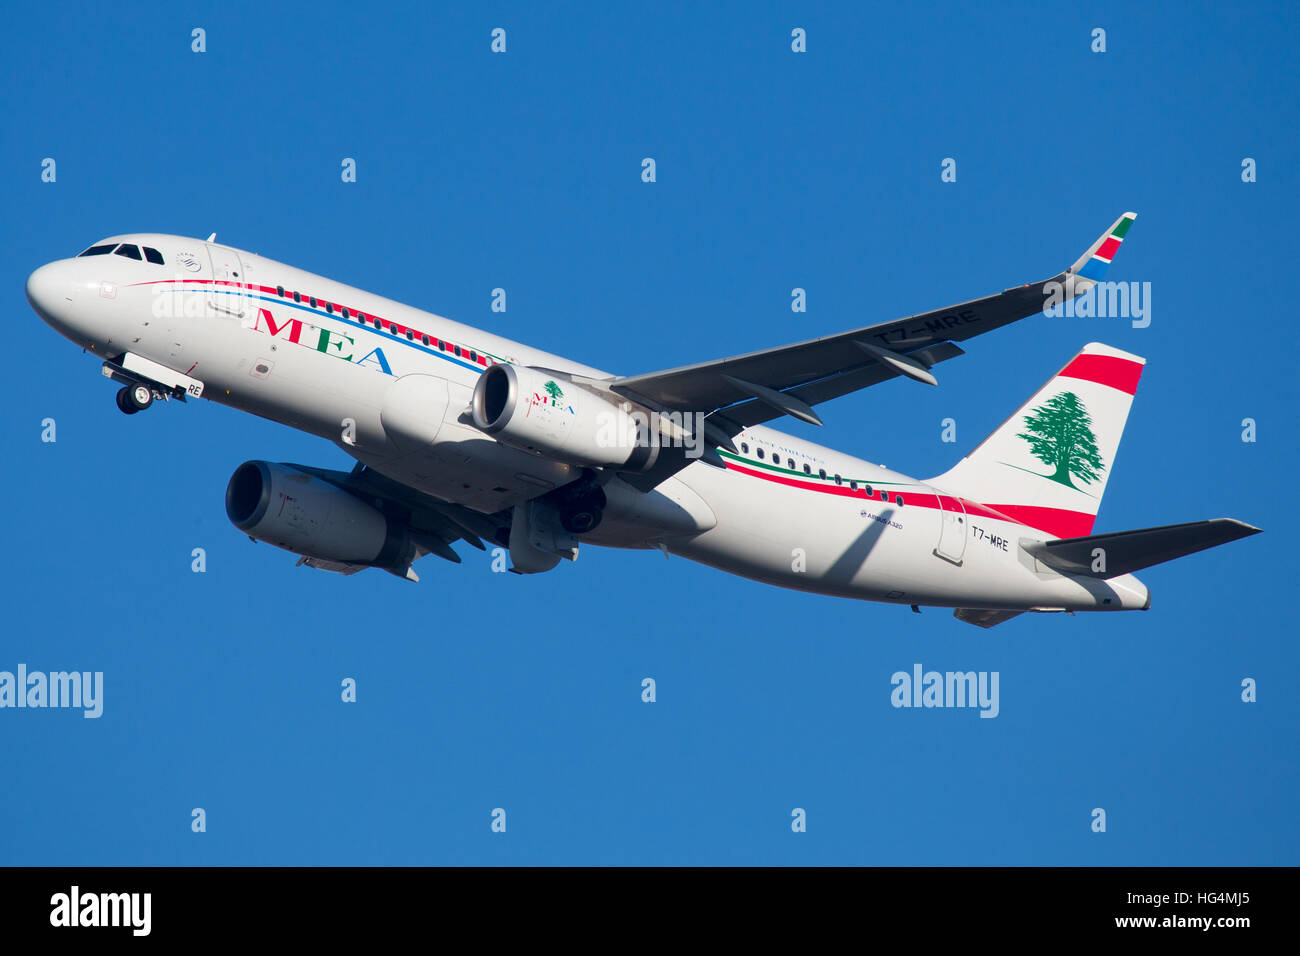 MEA Middle East Airlines Airbus A320 Aircraft Stock Photo